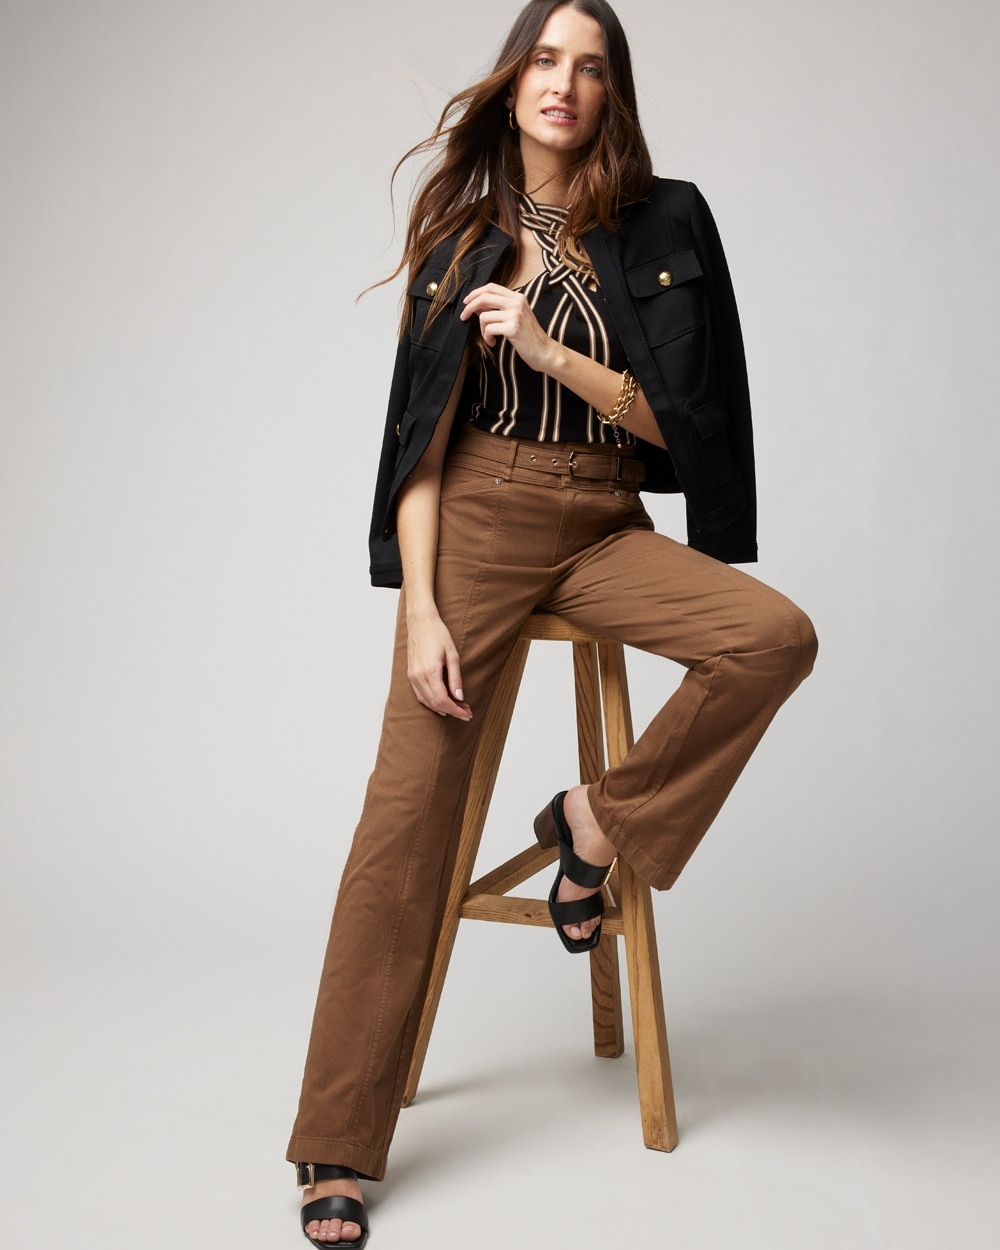 Pret Extra High-Rise Belted Trouser Pant video preview image, click to start video